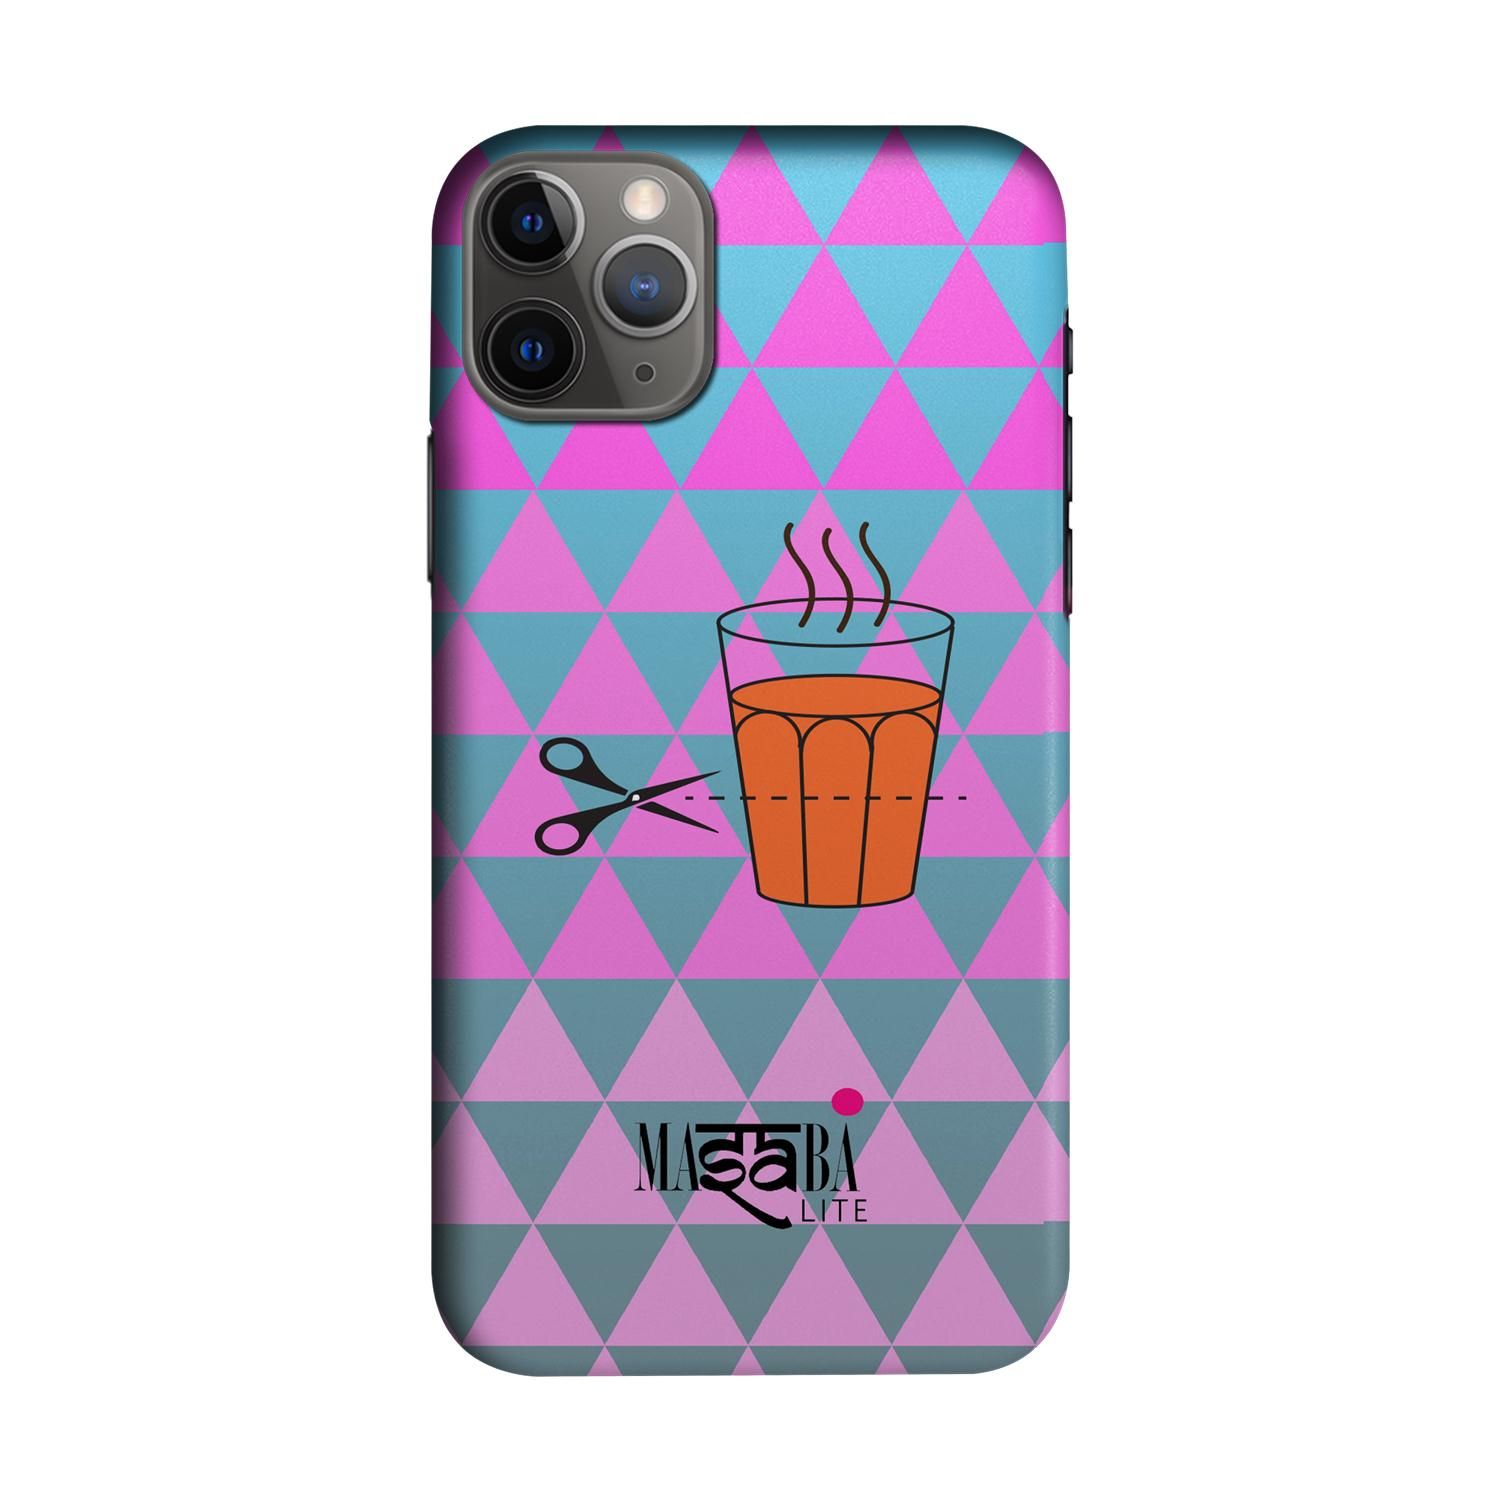 Buy Masaba Cutting Chai - Sleek Phone Case for iPhone 11 Pro Max Online